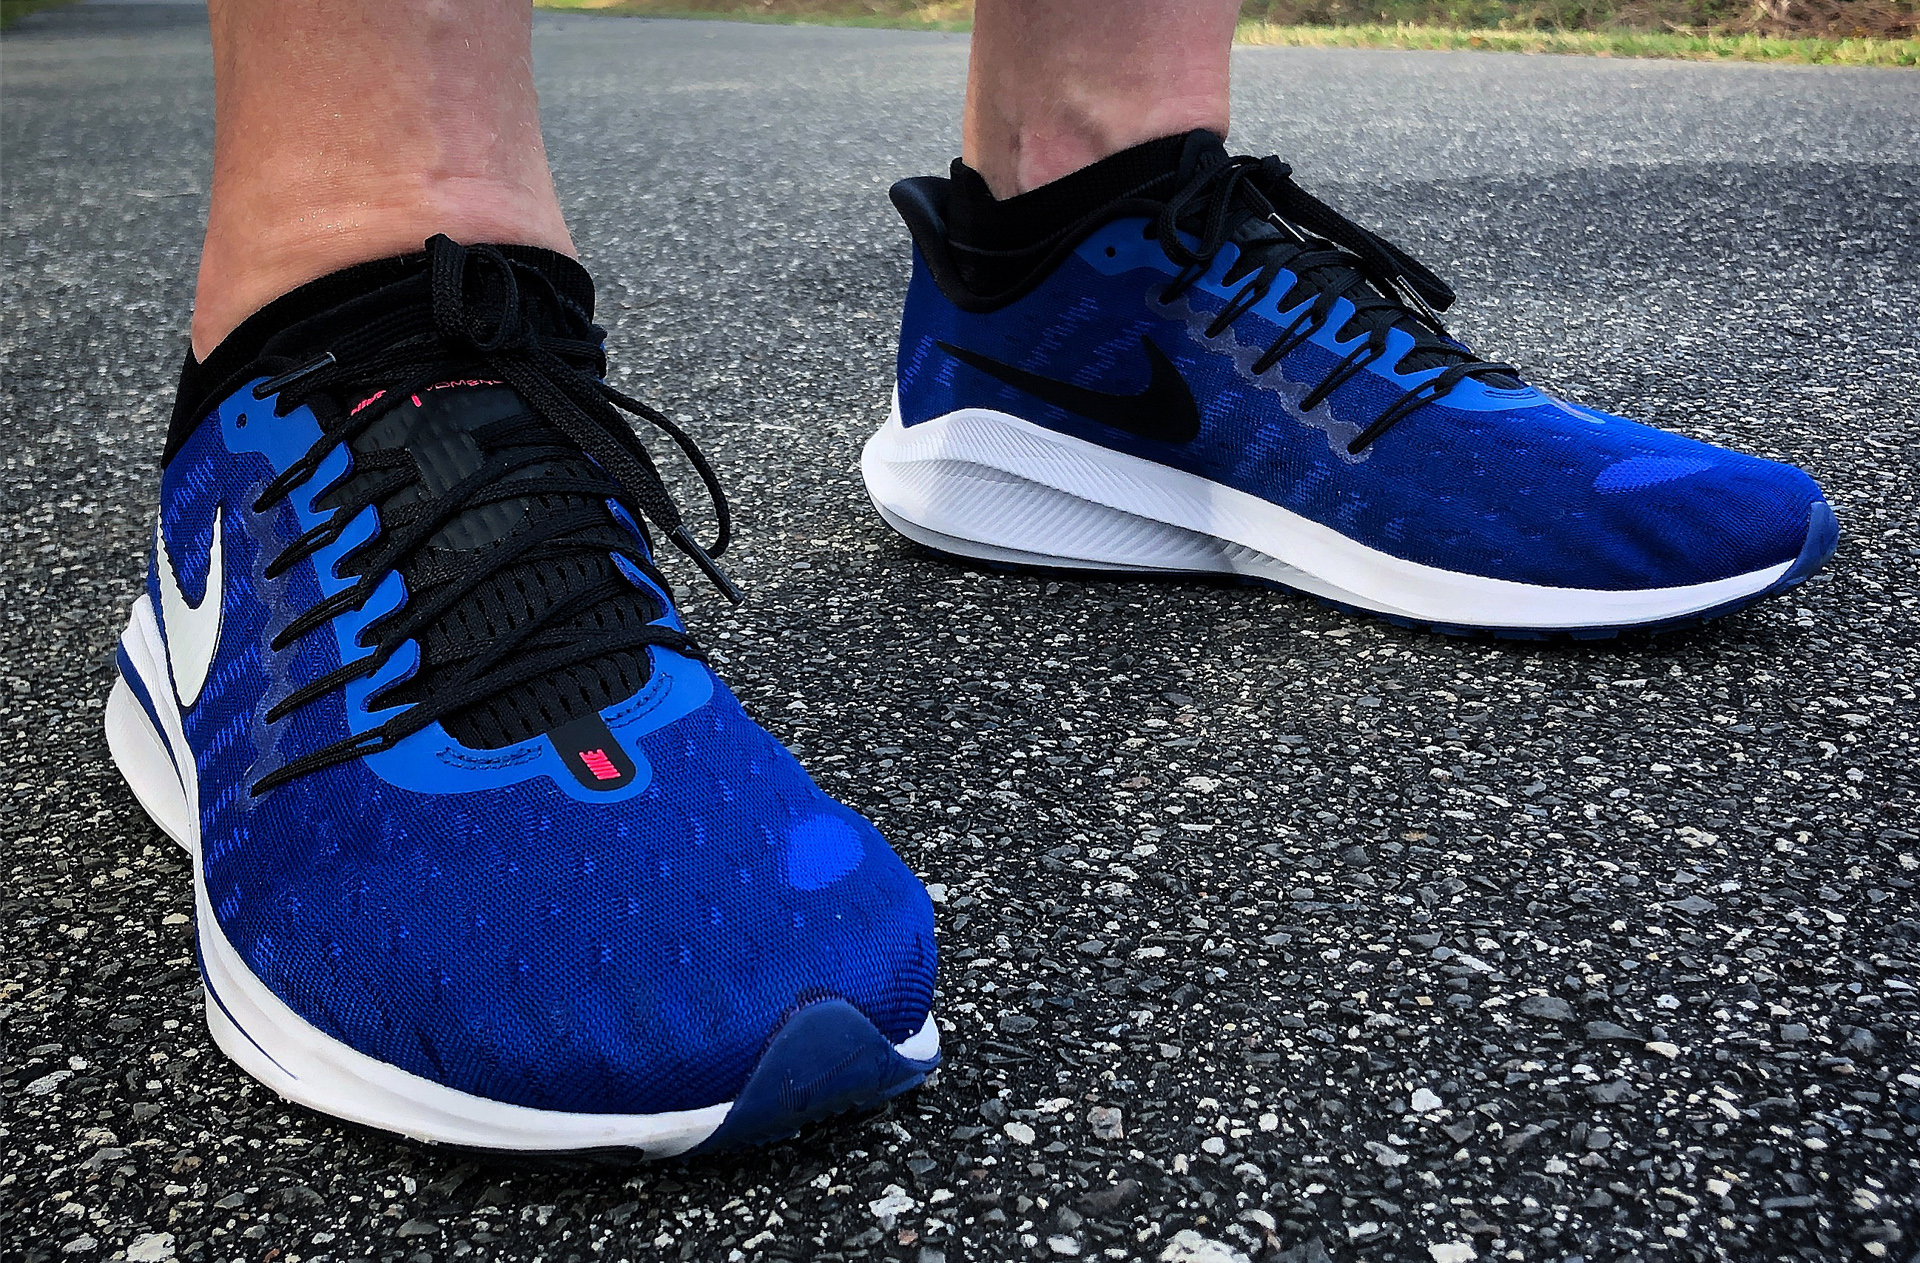 Nike Air Zoom Vomero 14 Performance Review - WearTesters